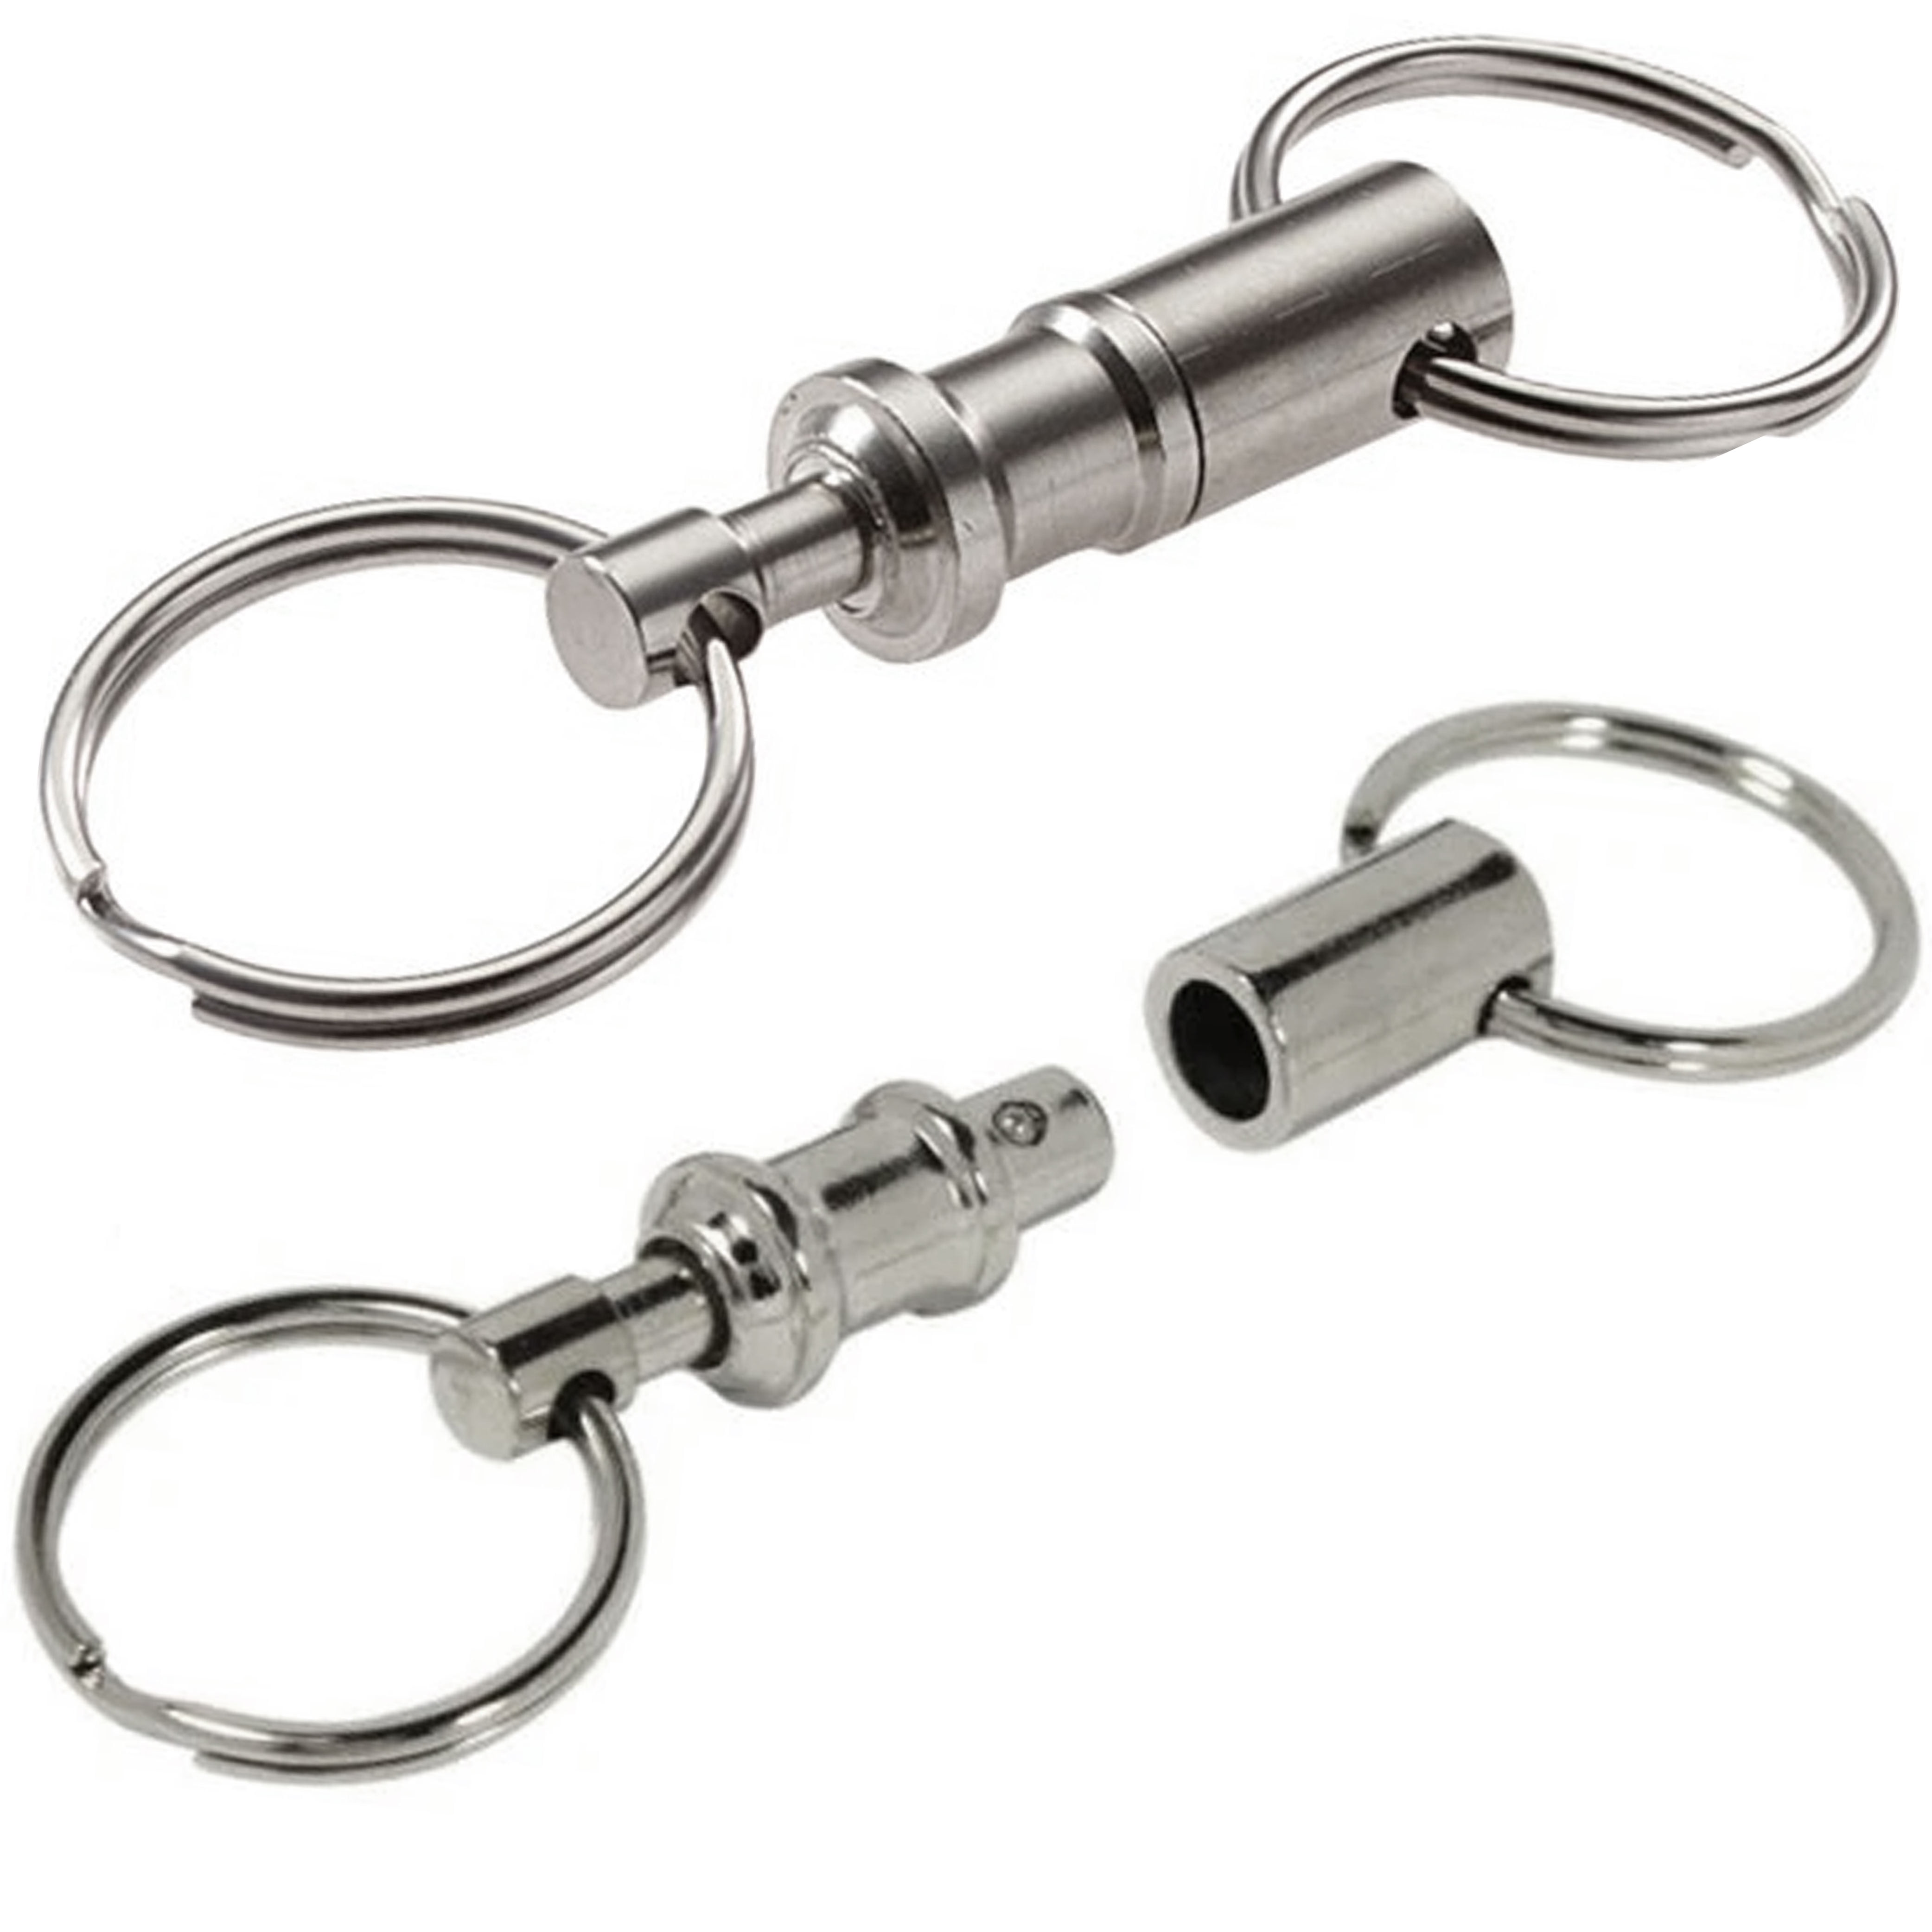 3-Pack Detachable Pull Apart Quick Release Keychain Key Rings/ US Free Shipping 